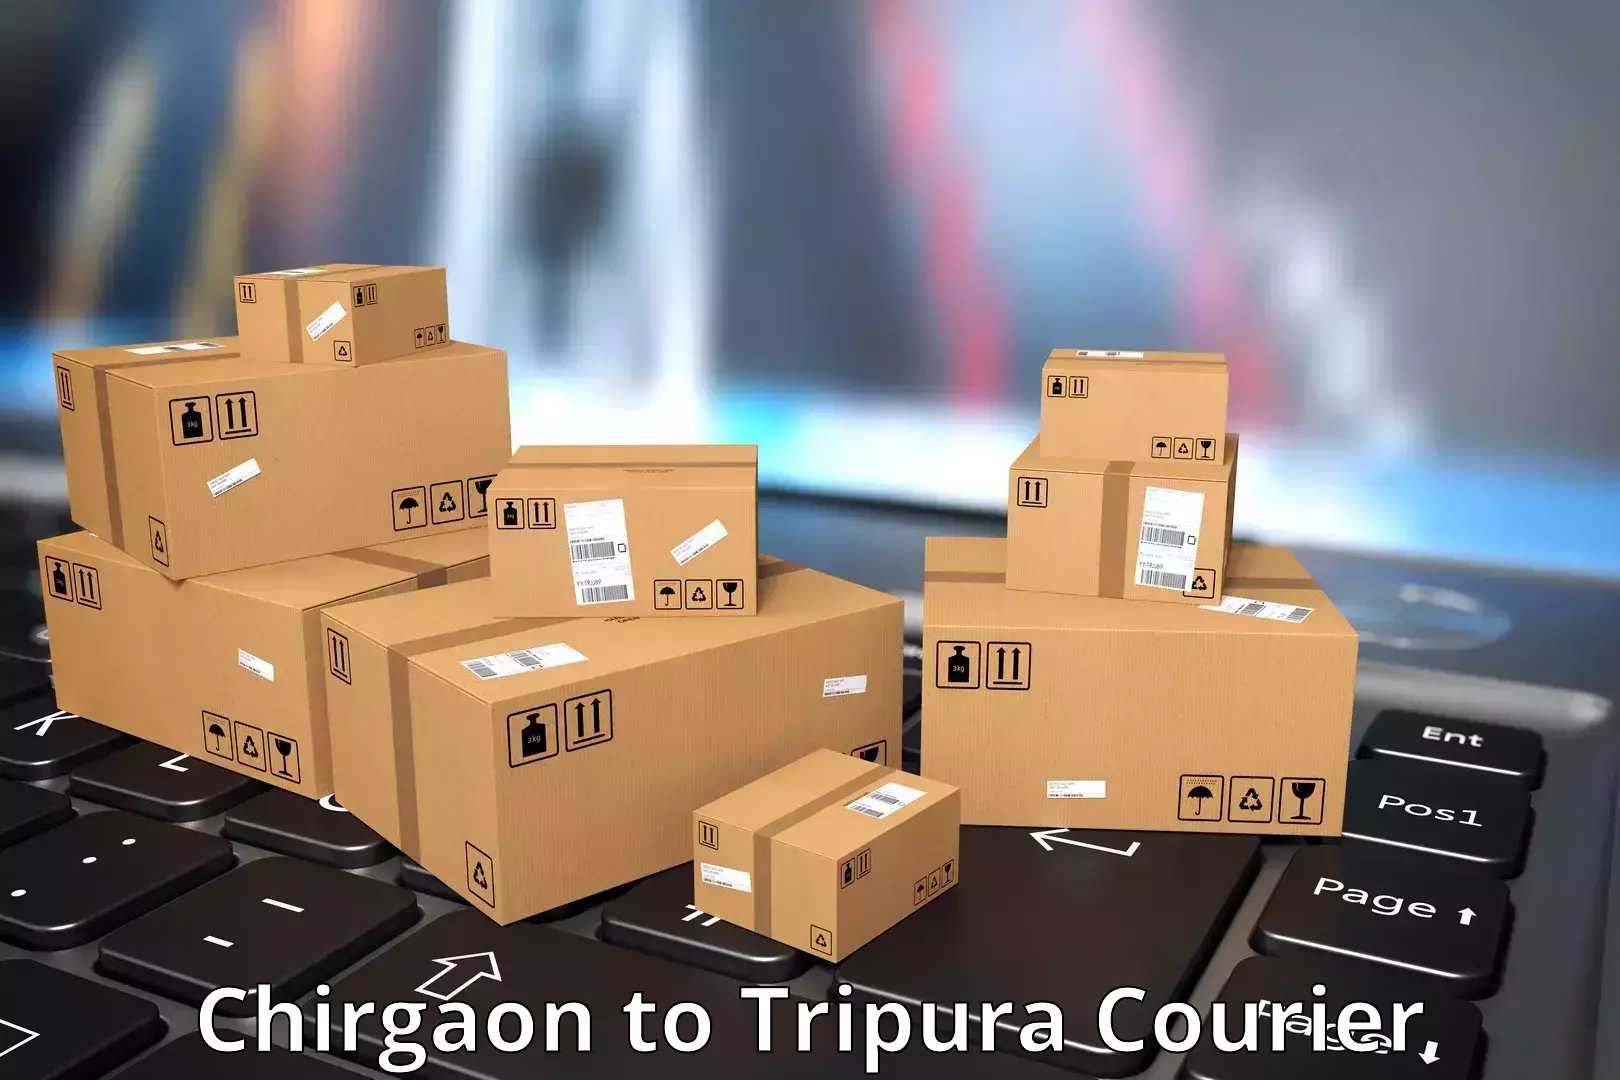 Delivery service partnership Chirgaon to Tripura